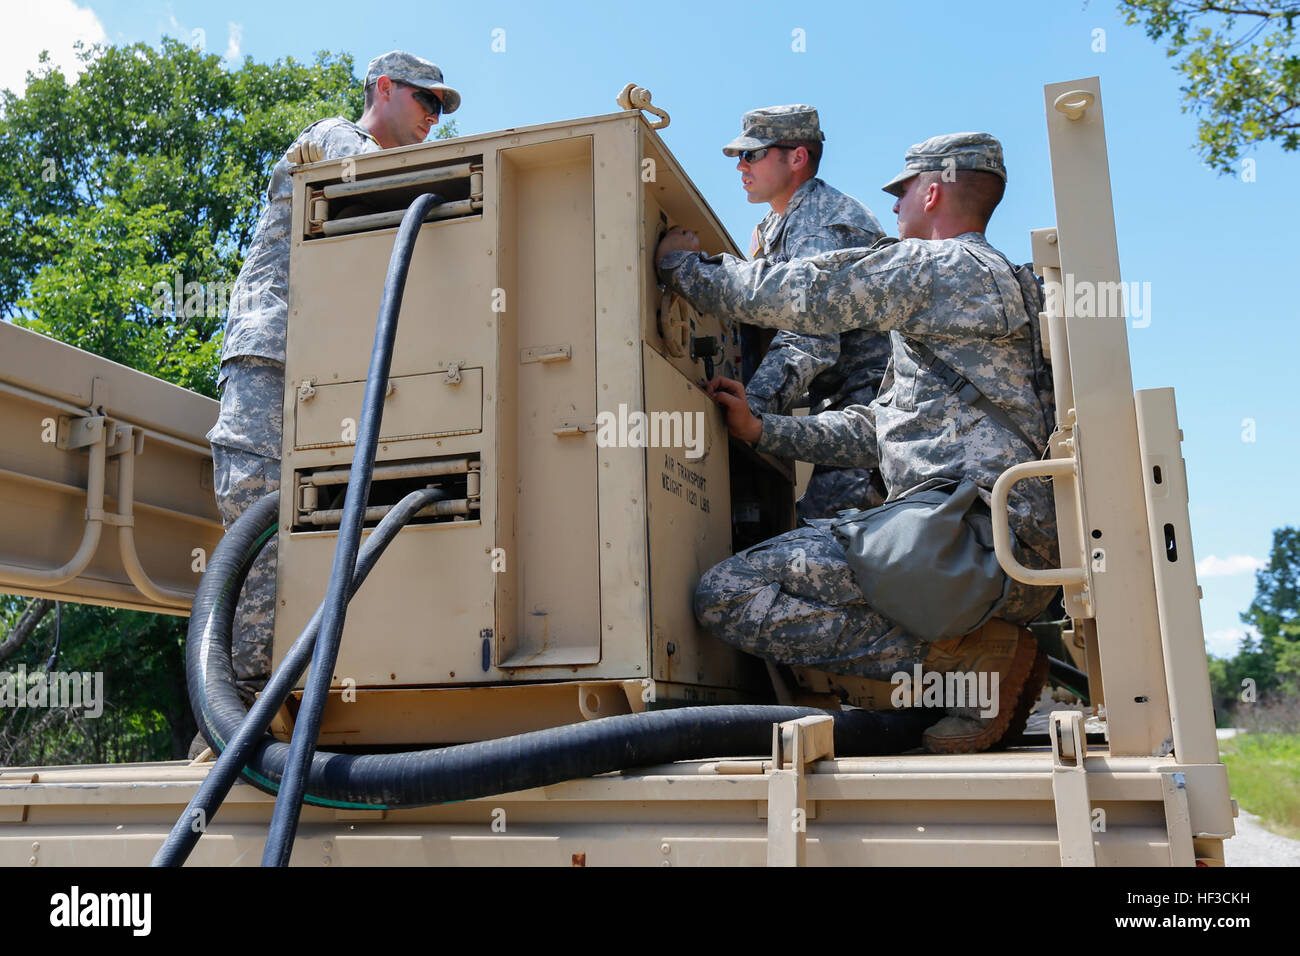 Spc. Dominic Ashley, Spc. Casey Shockey, and Pfc. Austin Eldridge, assigned to the 3175th Chemical Company, 835th Combat Sustainment Support Brigade, work together to set up an M12A1 Power Driven Decontamination Apparatus in preparation for a decontamination exercise during annual training on June 8, 2015 at Fort Leonard Wood, Mo. Soldiers manned five stations, three equipped with PDDAs, to clean and decontaminate vehicles after a simulated chemical attack. (U.S. Army photo by Pfc. Samantha J. Whitehead) Missouri Guard Chemical Company trains to keep troops, equipment safe 150608-Z-YF431-016 Stock Photo